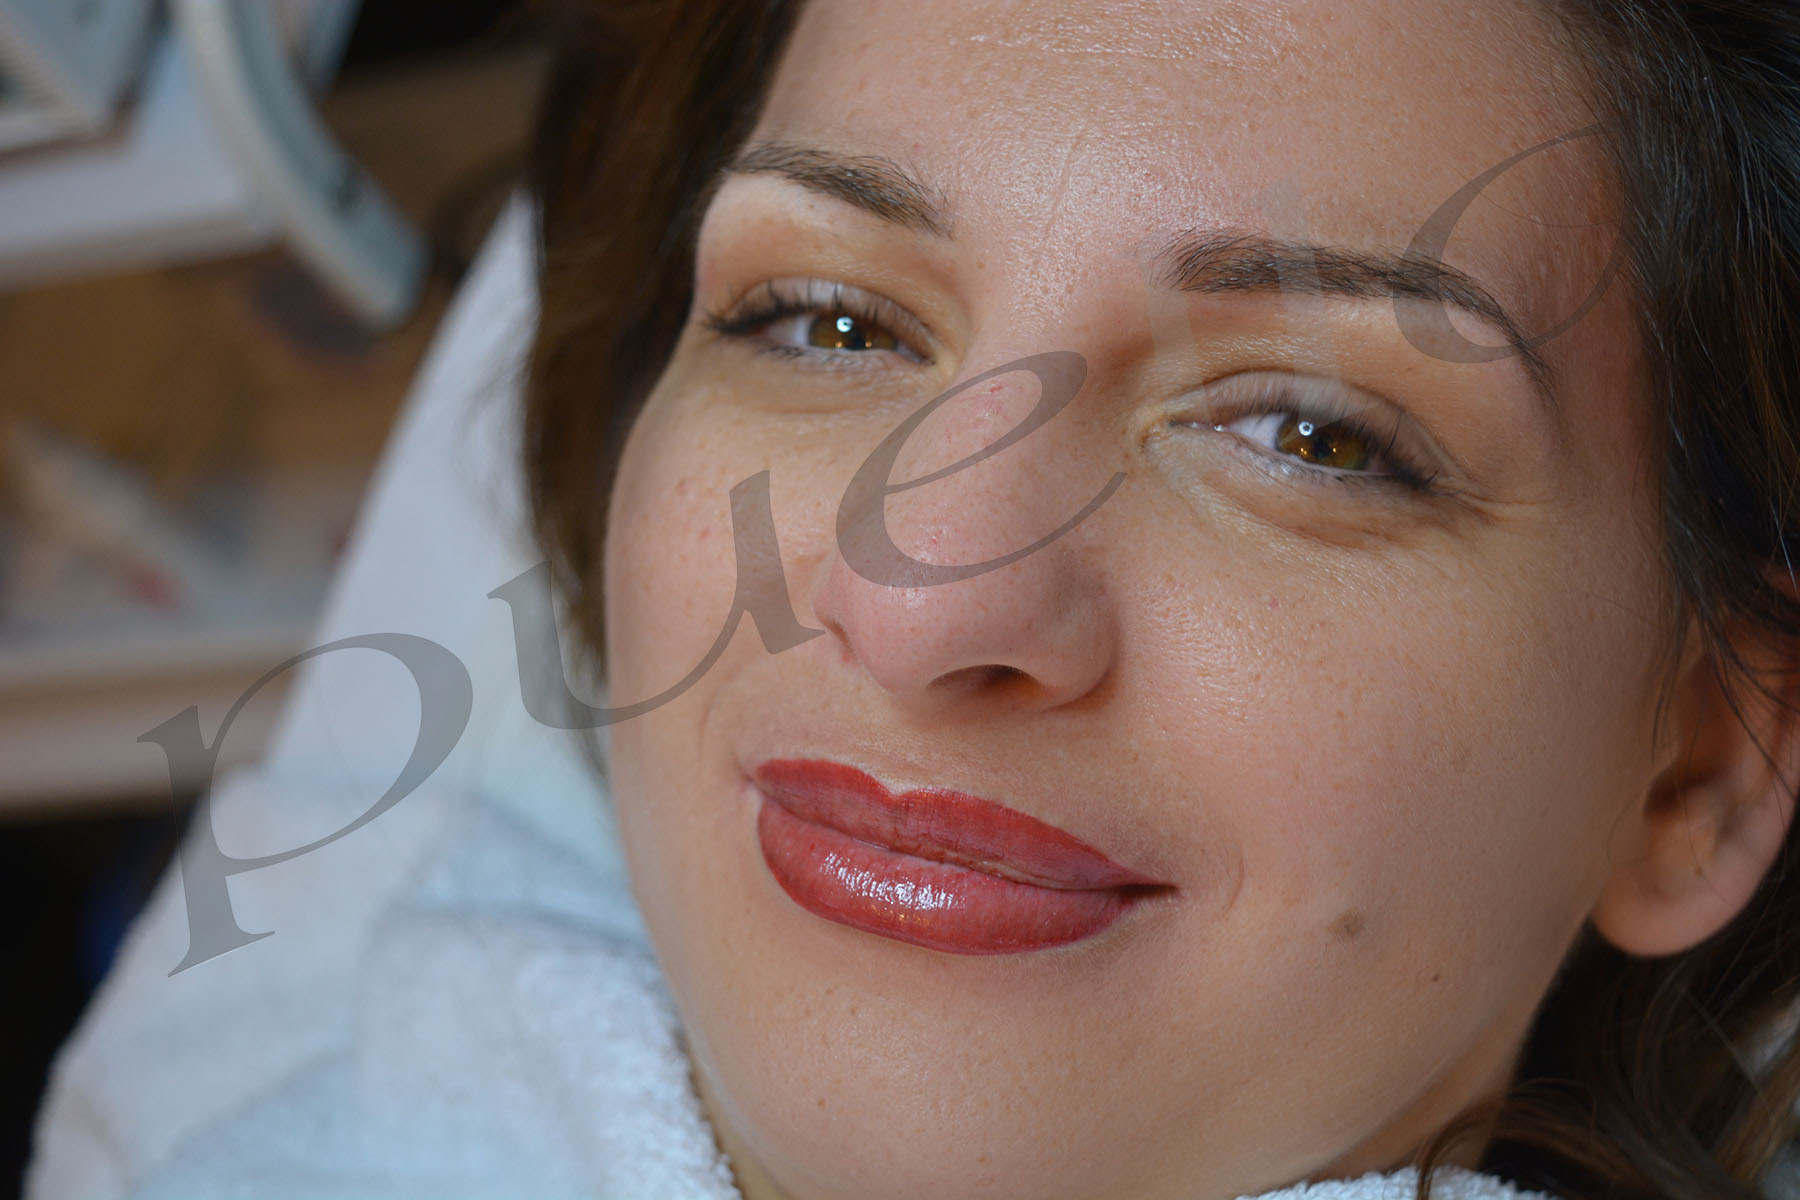 Permanent makeup by Puella Beauty - lips and eyebrows image